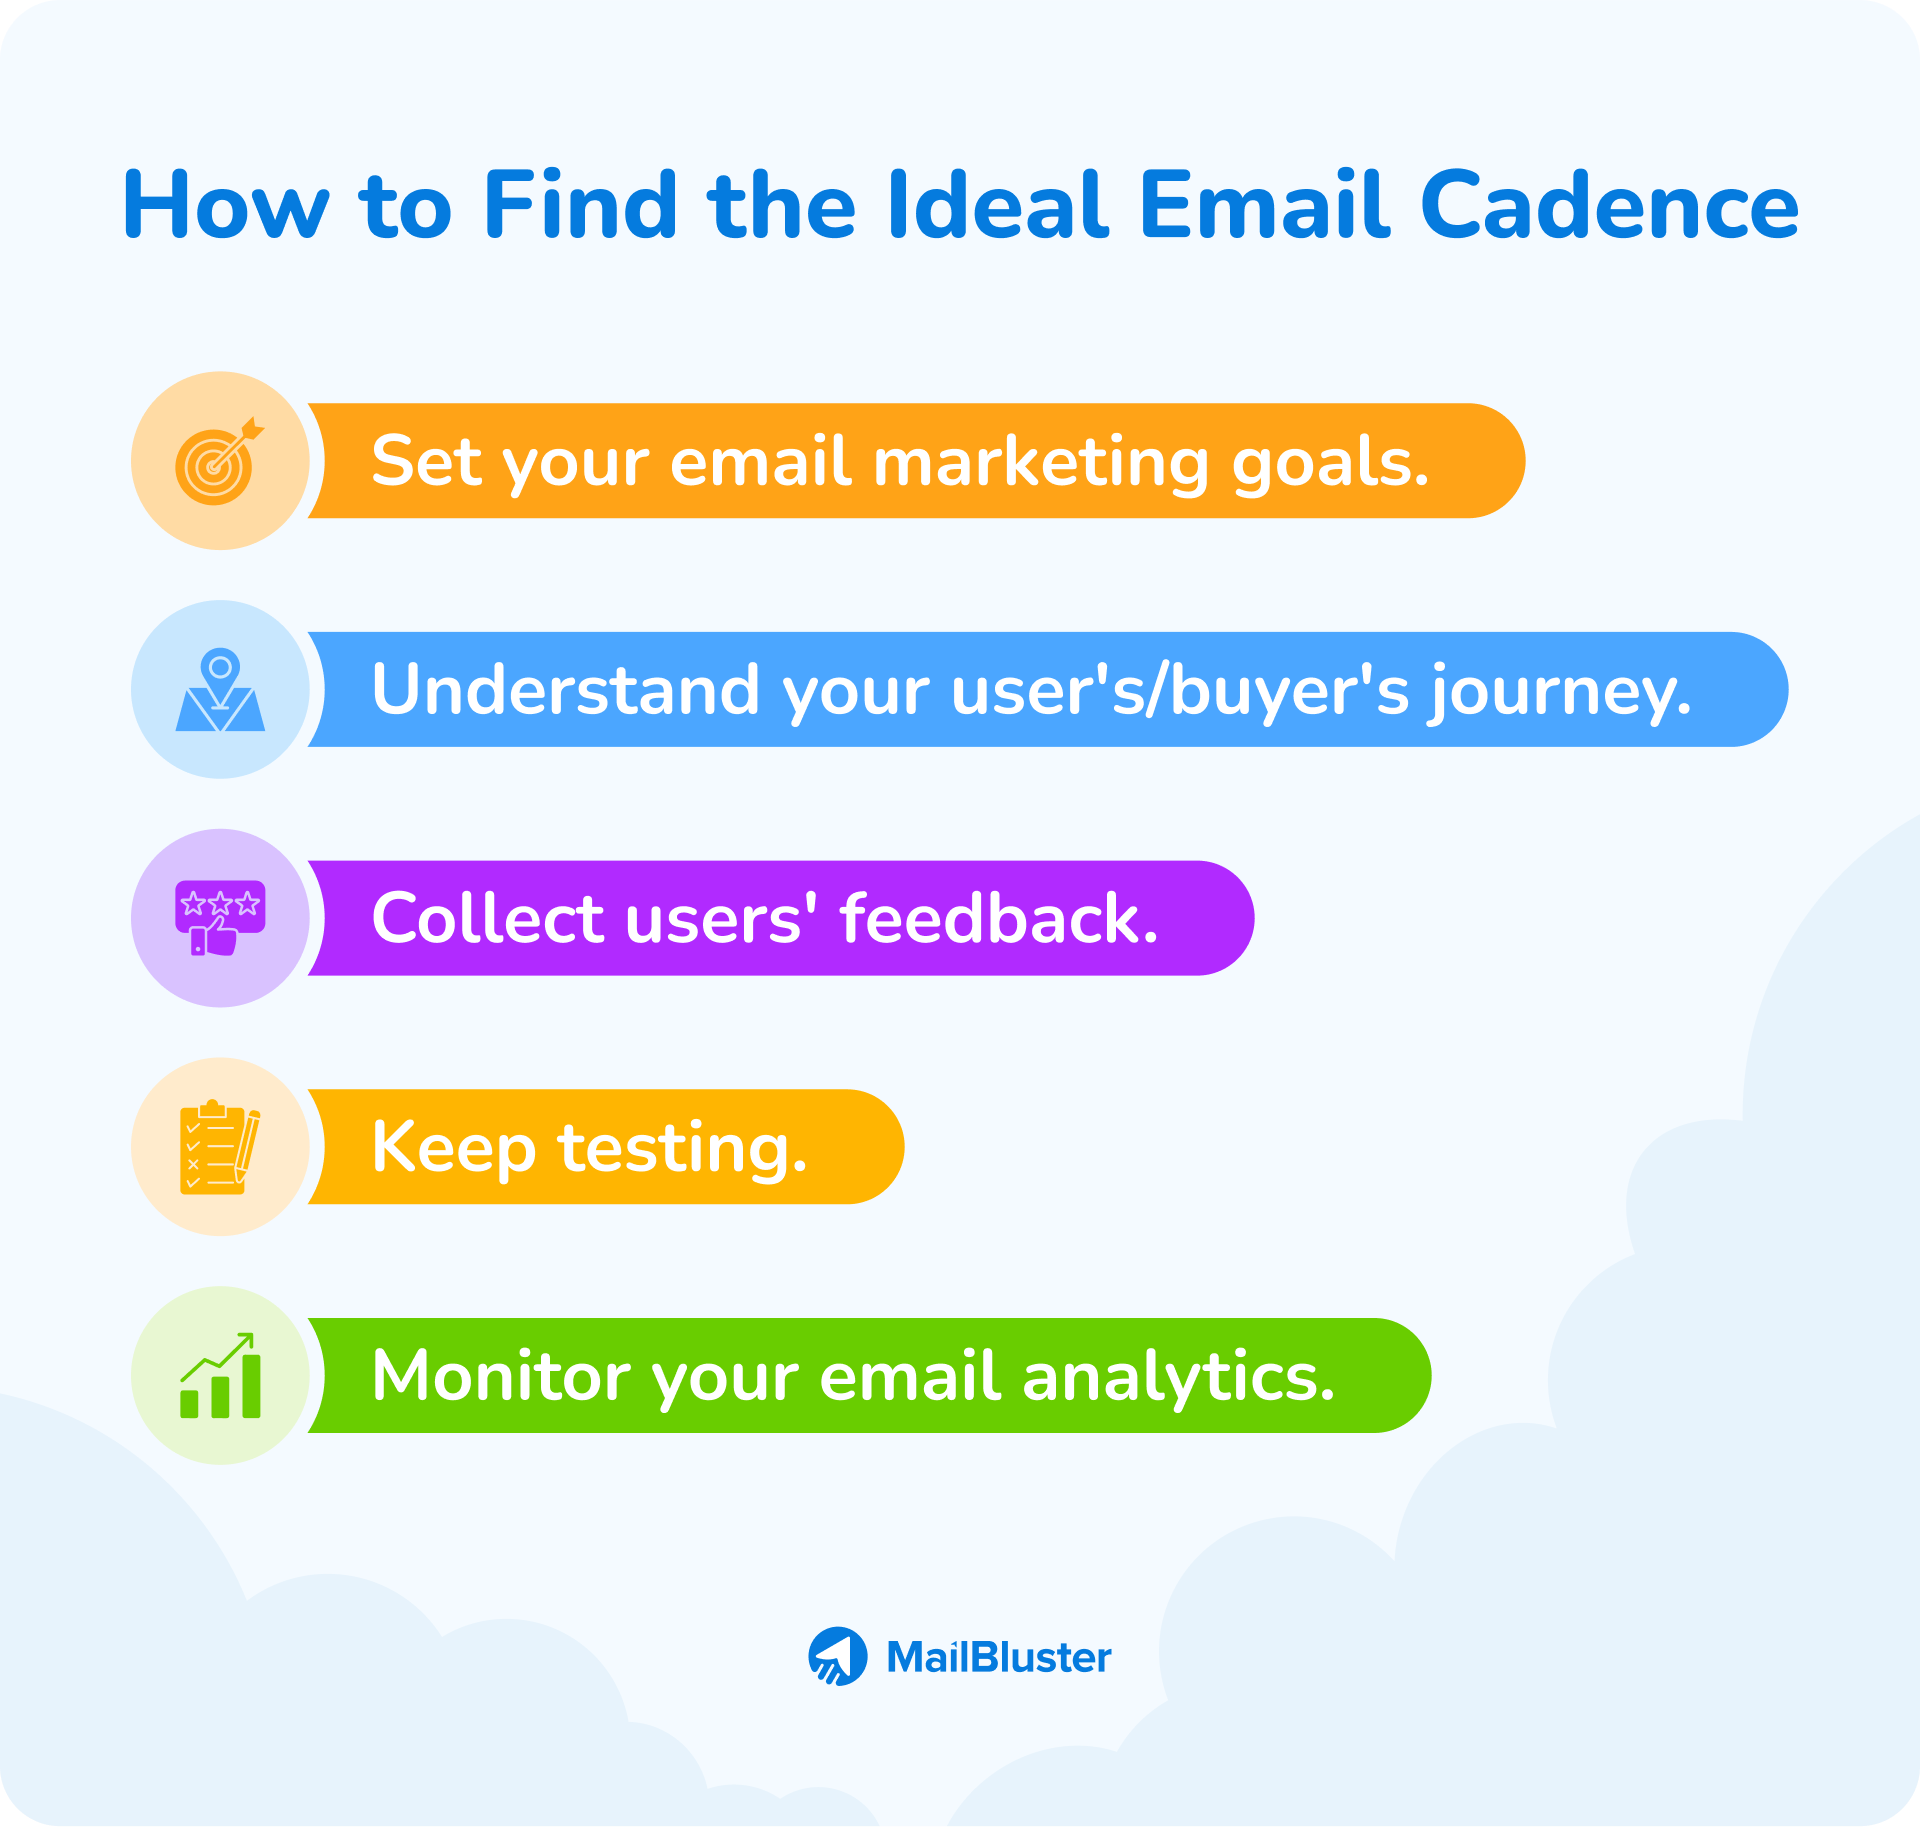 How to Find the Ideal Email Cadence